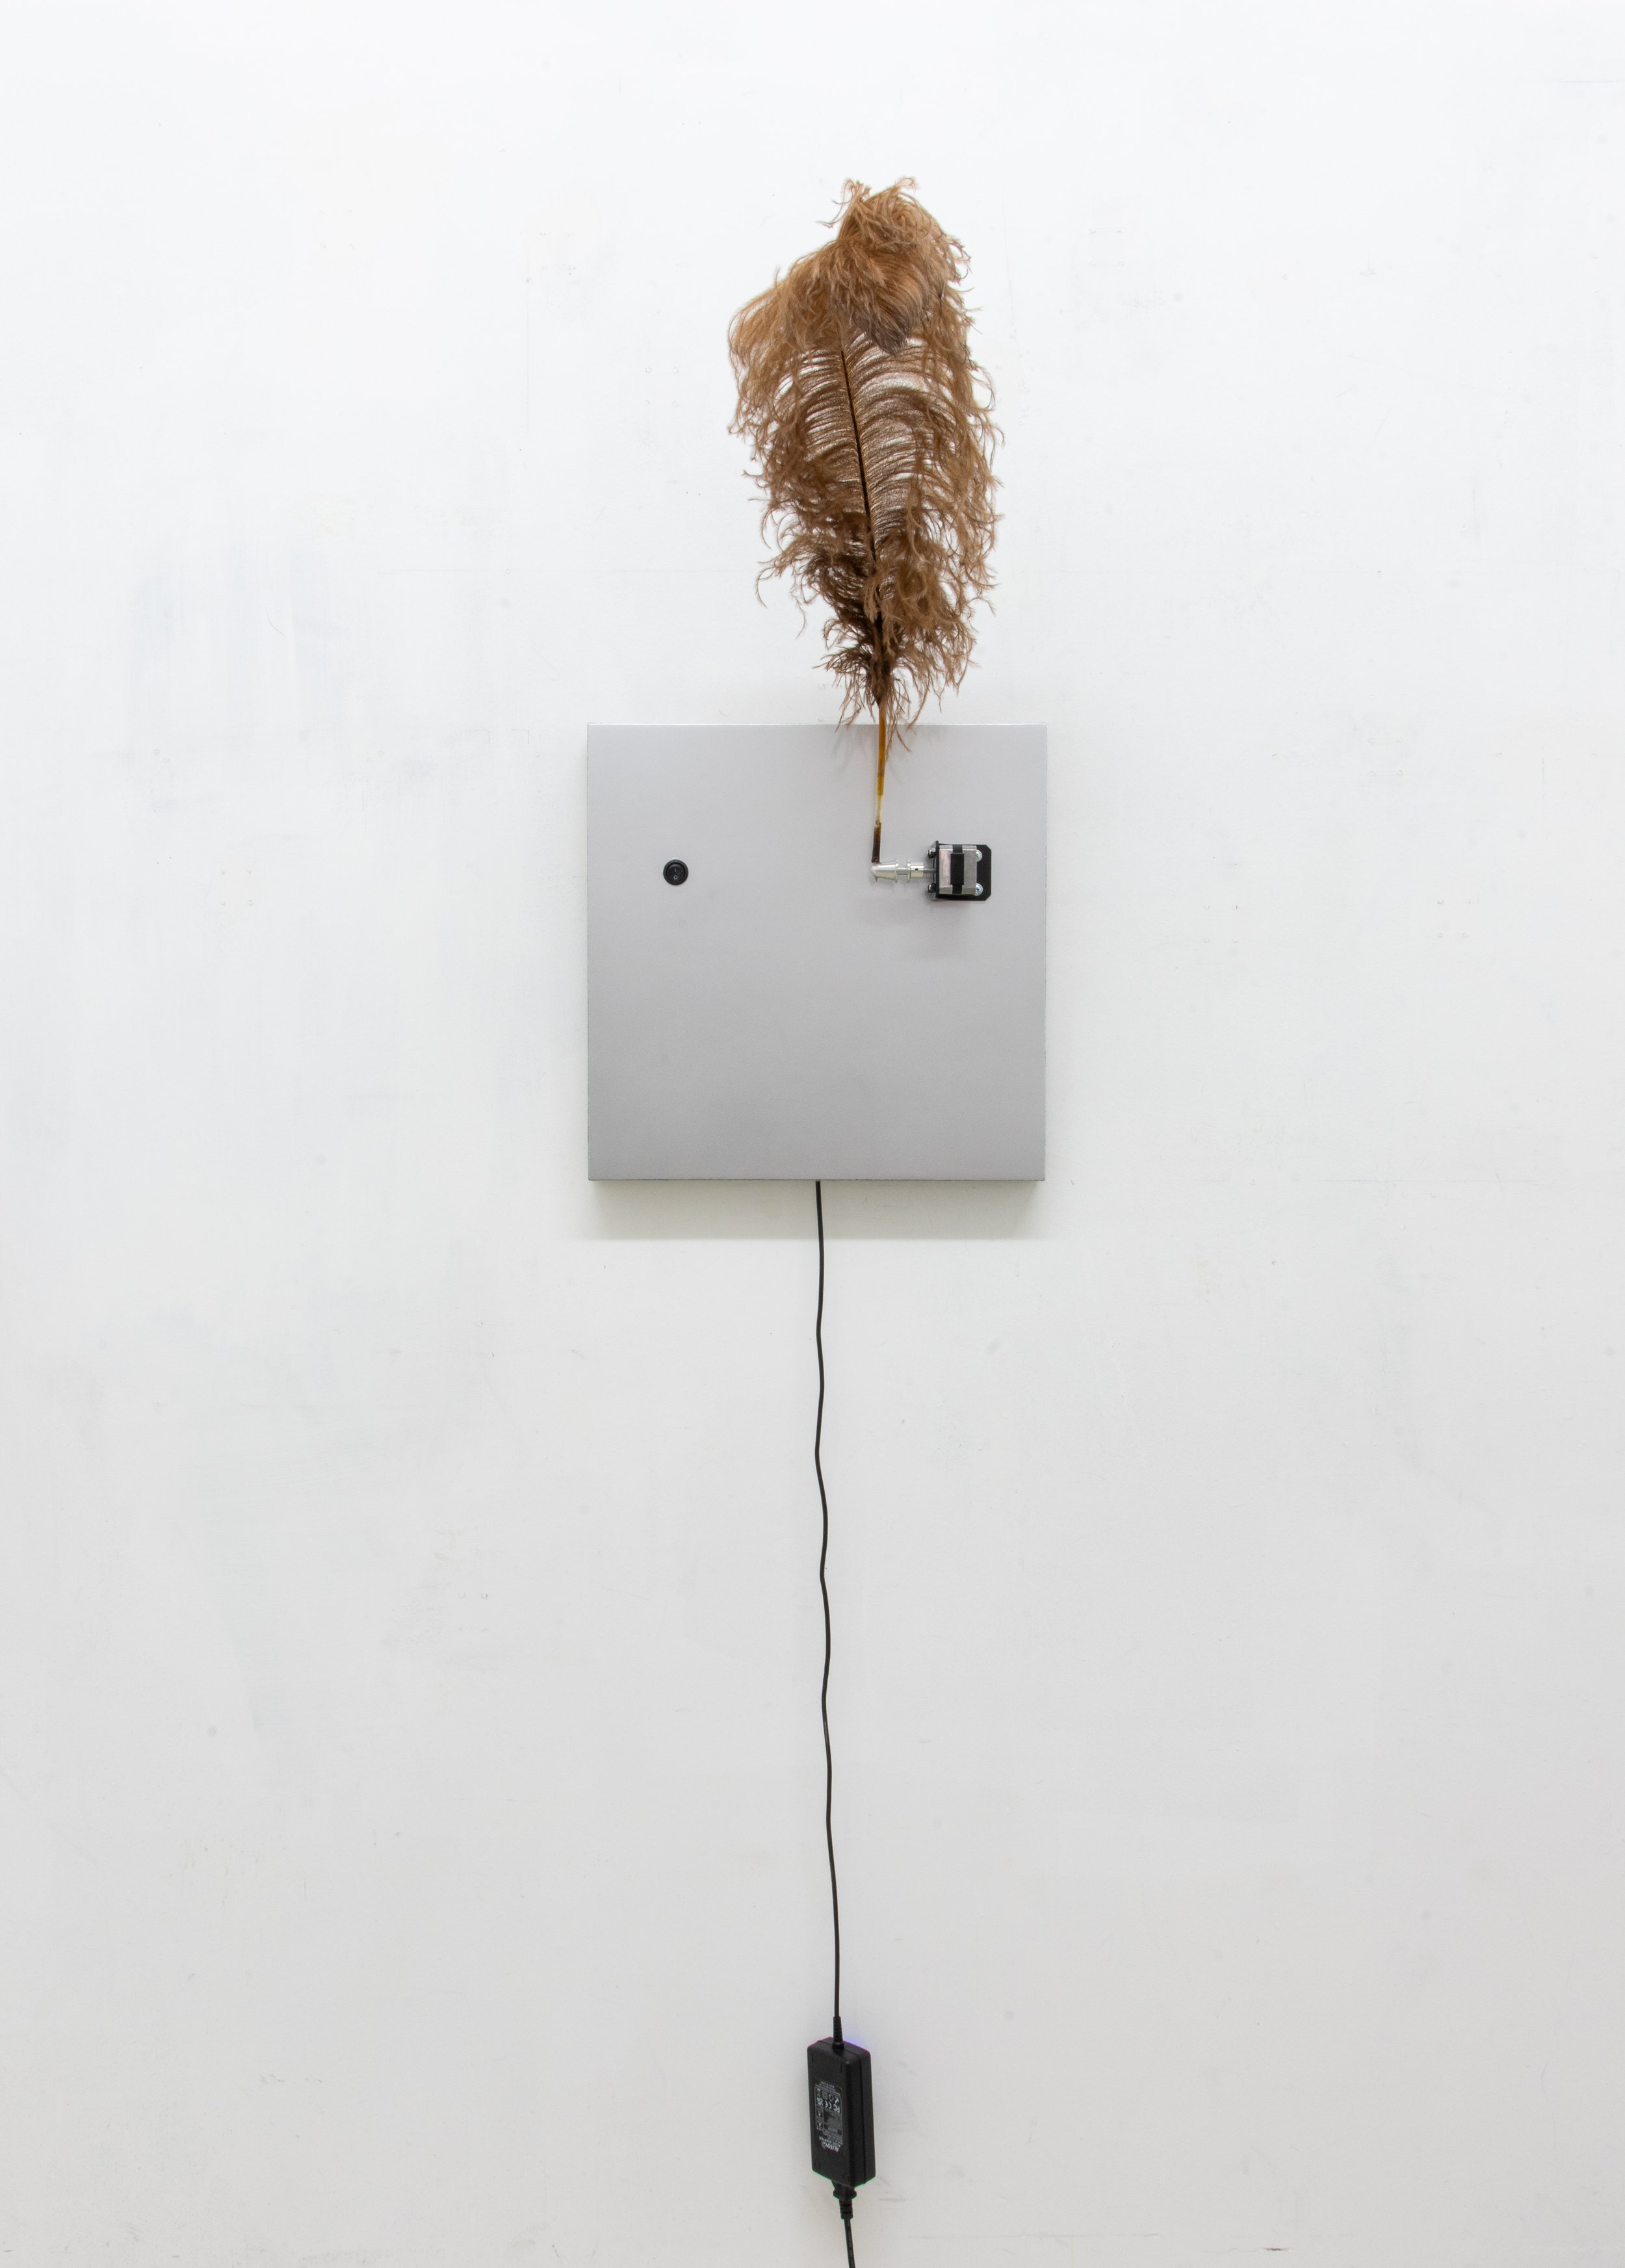  Untitled, 2023 Ostrich feather, prop adapter, stepper motor, bracket, wire, docking connector, PCB board, Arduino Nano, 12V adapter, enamel on linen 50 x 16 in. &nbsp; 127 x 40.64 cm 